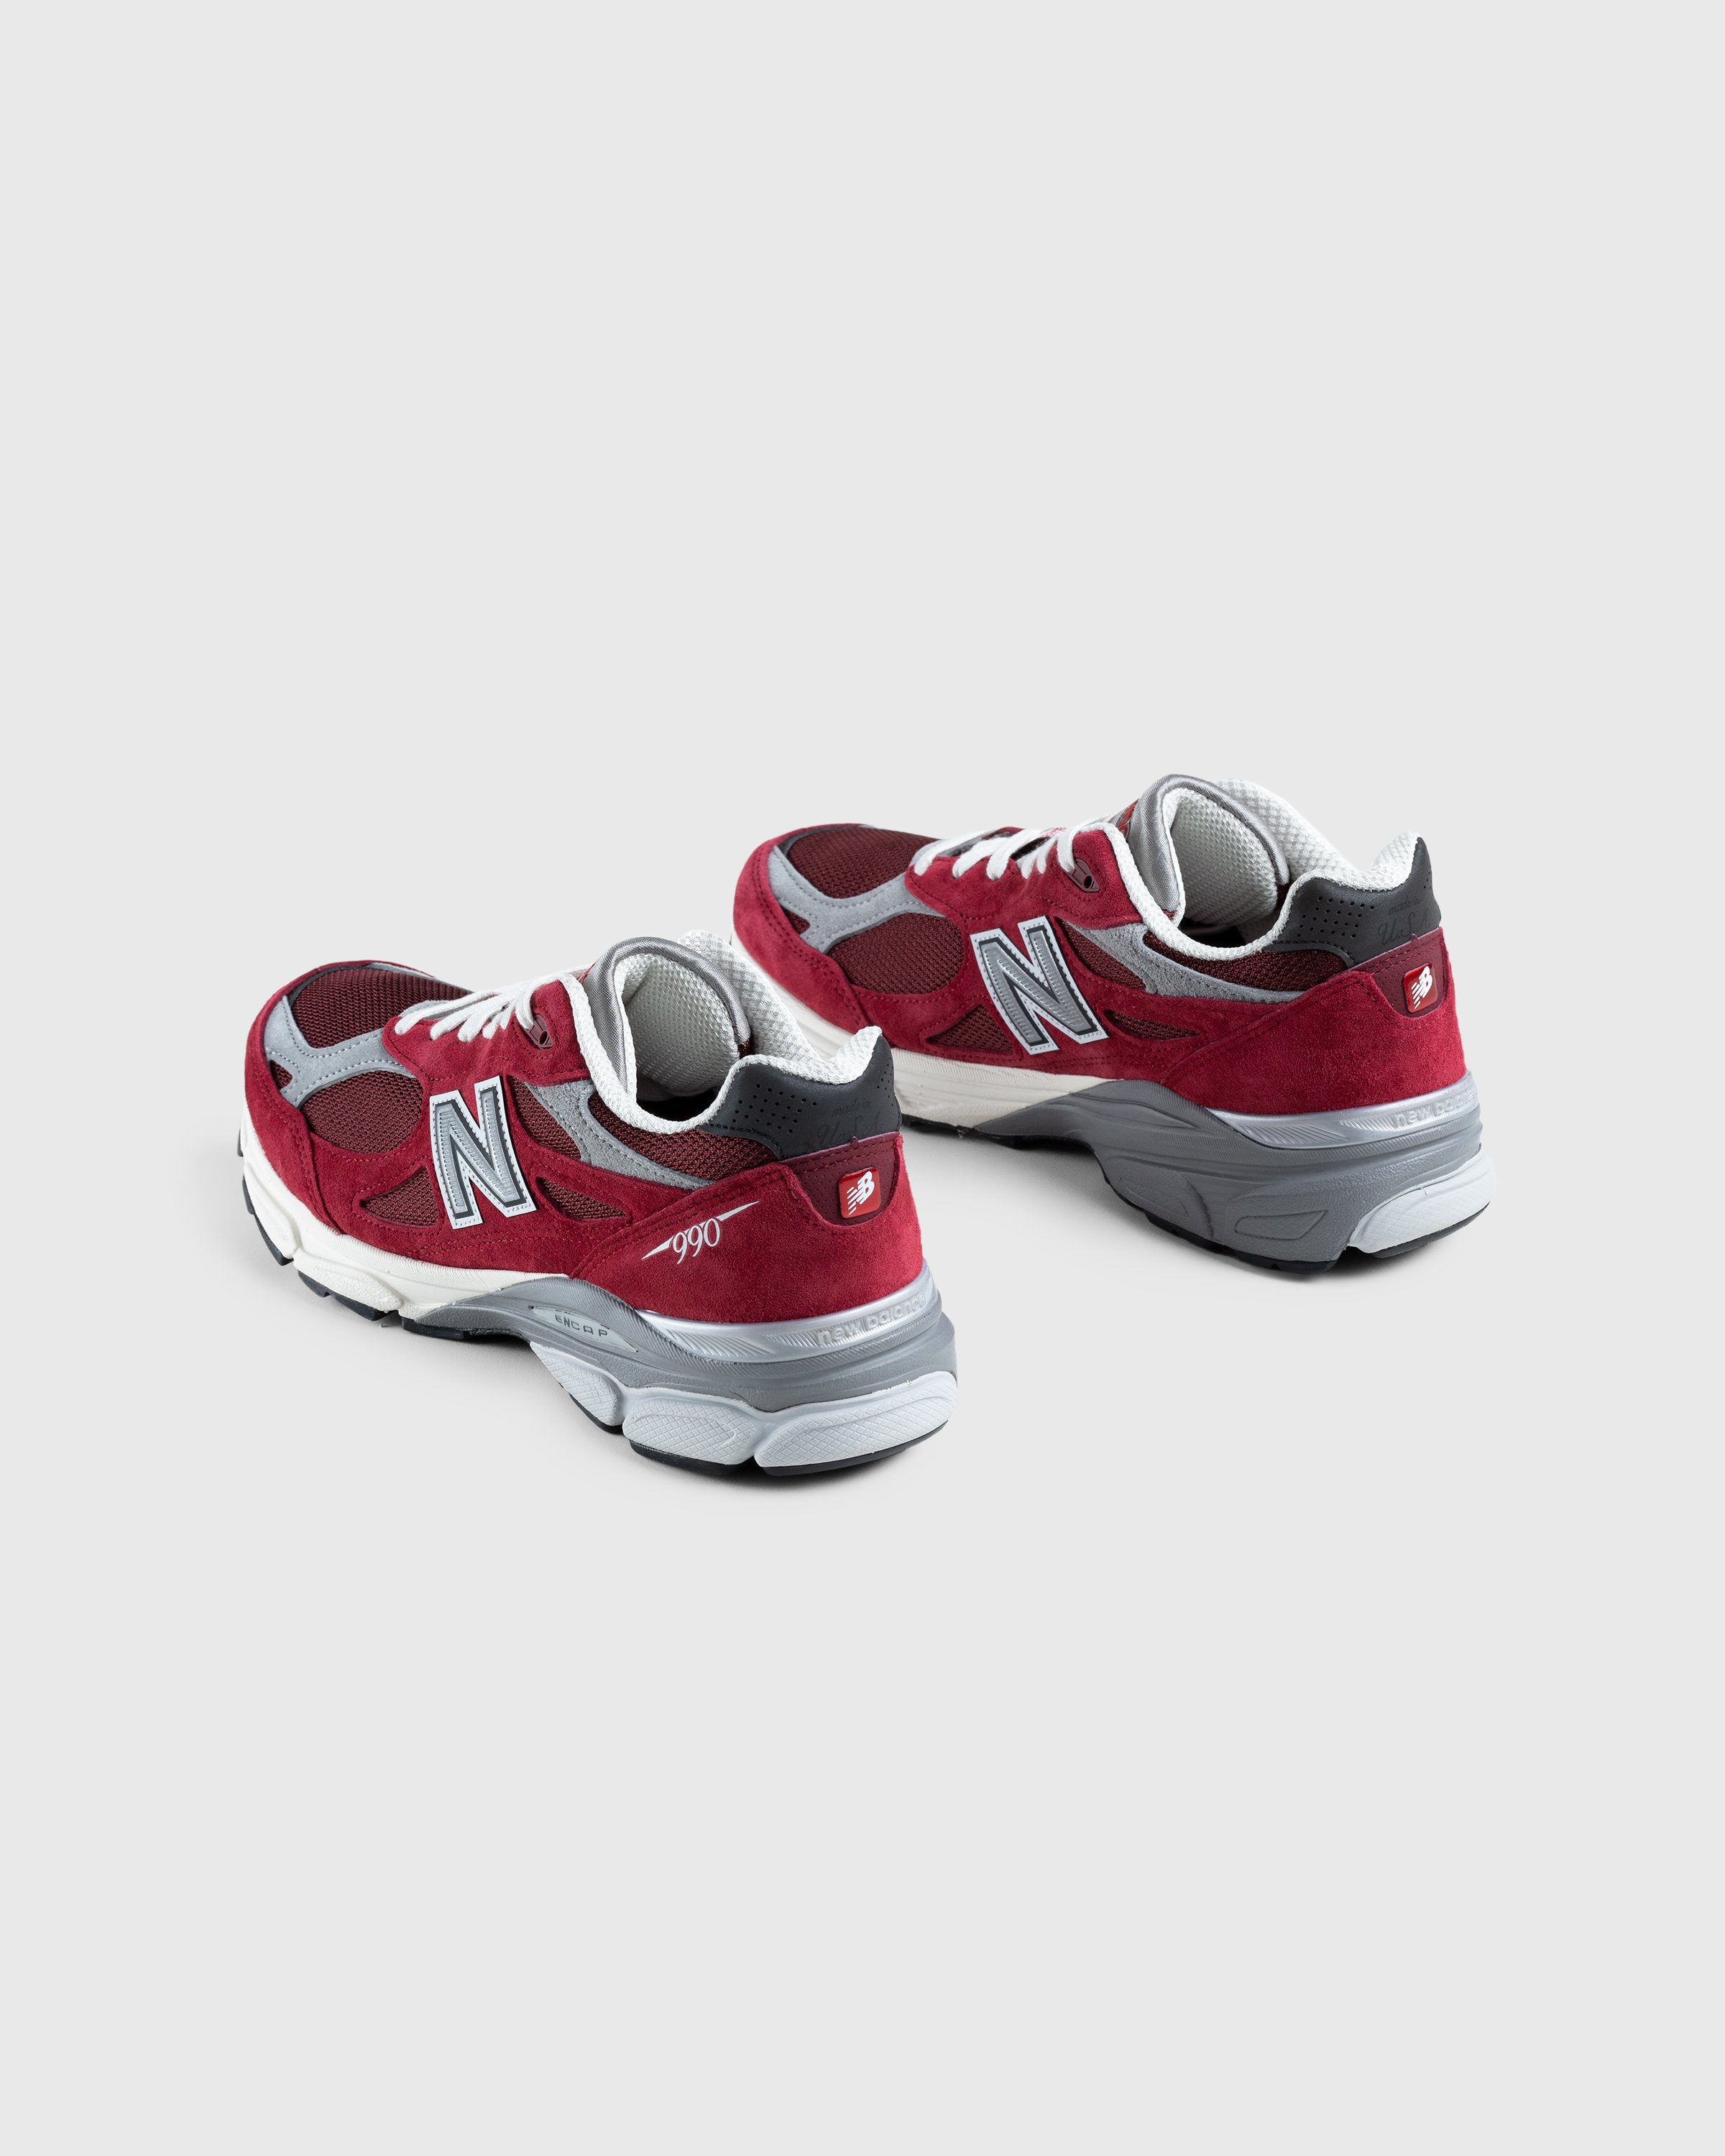 New Balance - M990TF3 Red - Footwear - Red - Image 4